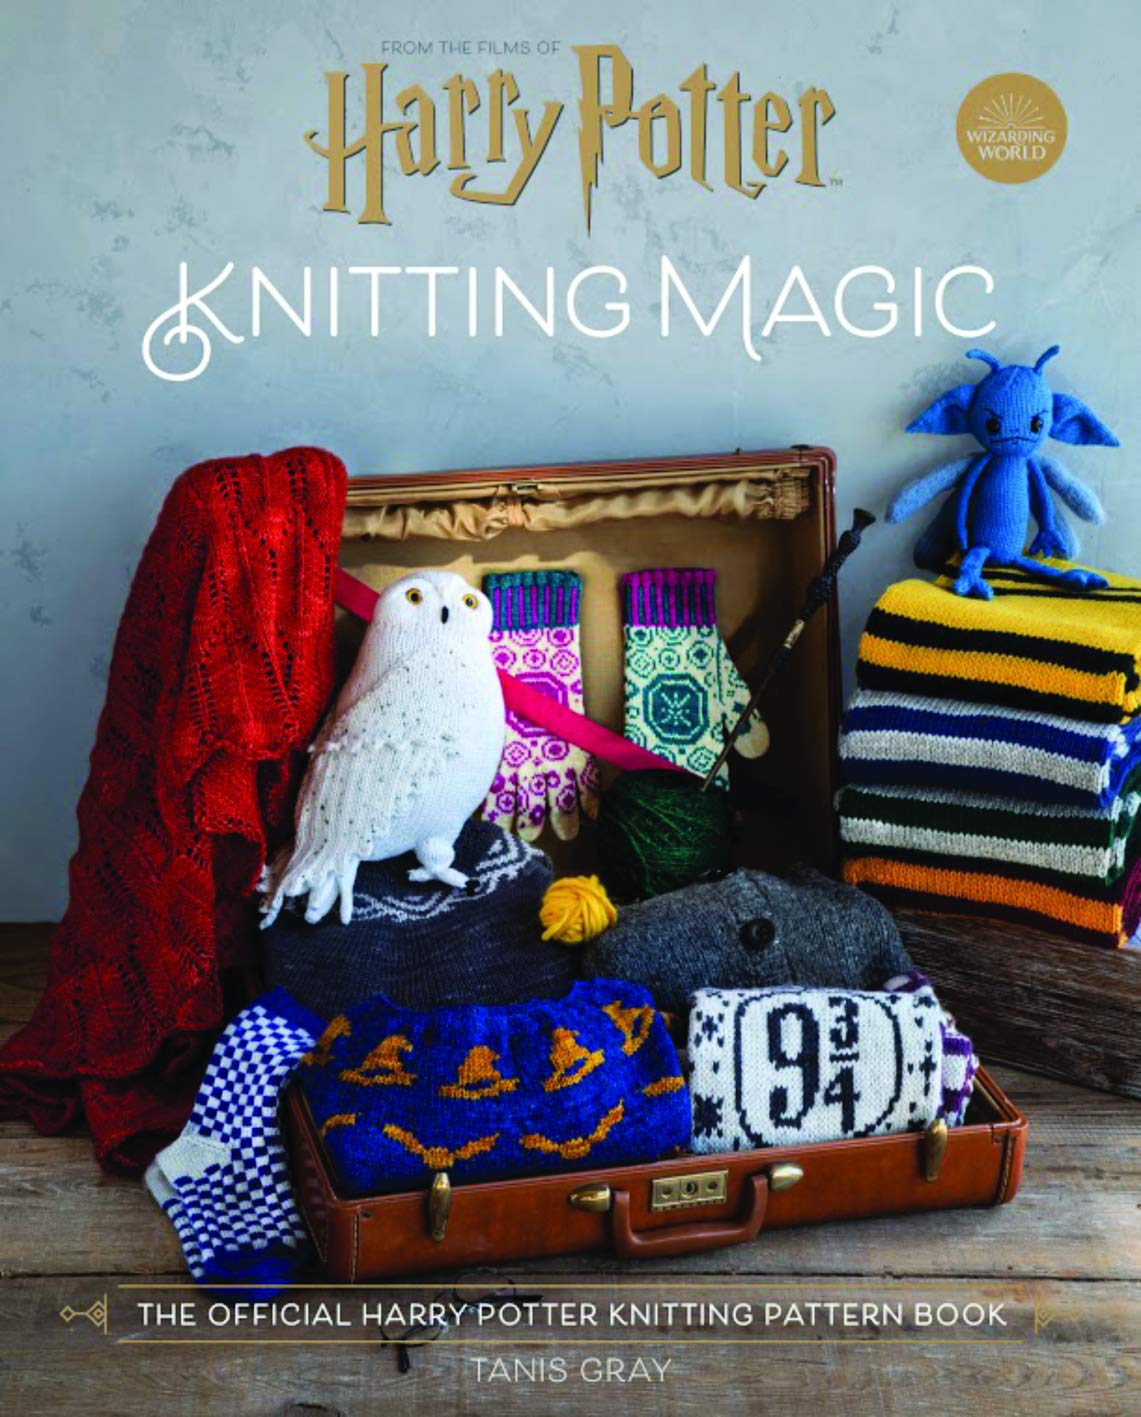 Harry Potter: Knitting Magic The Official Harry Potter Knitting Pattern Book